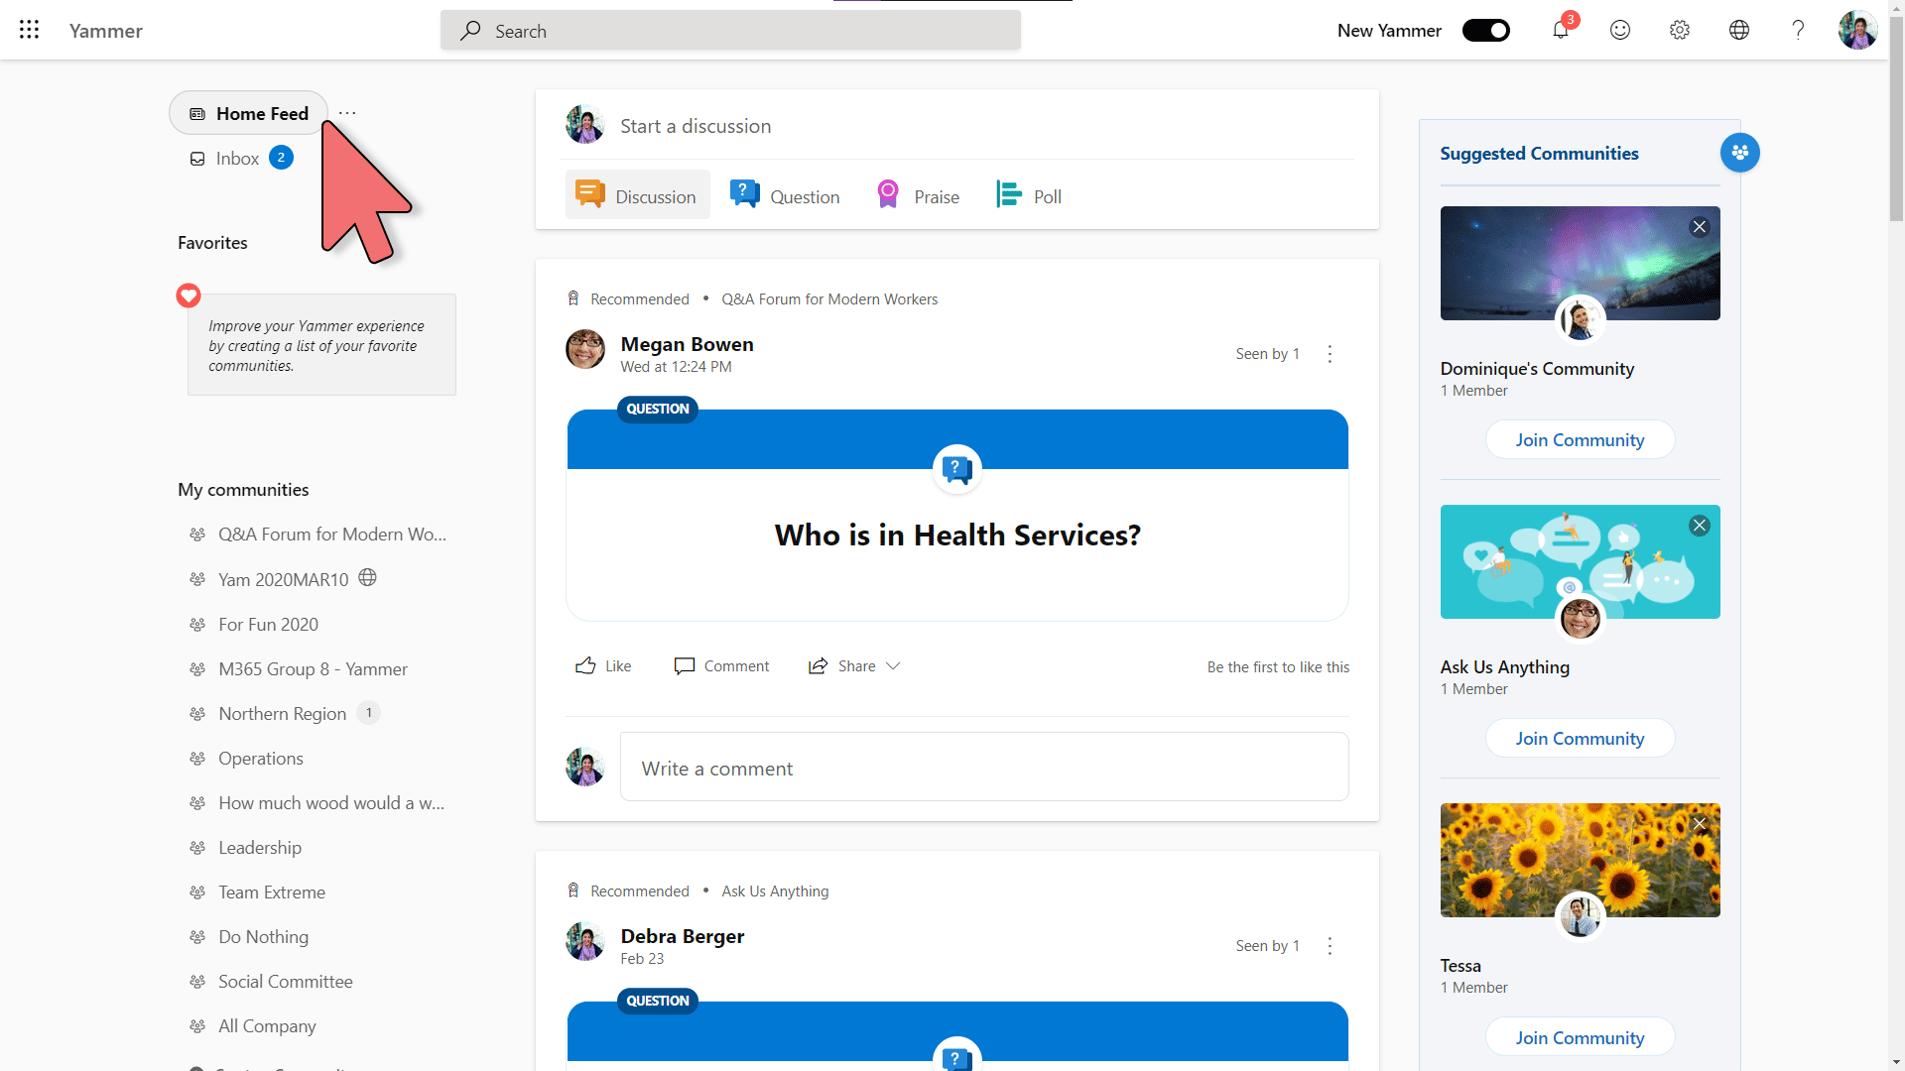 Yammer - Home Feed